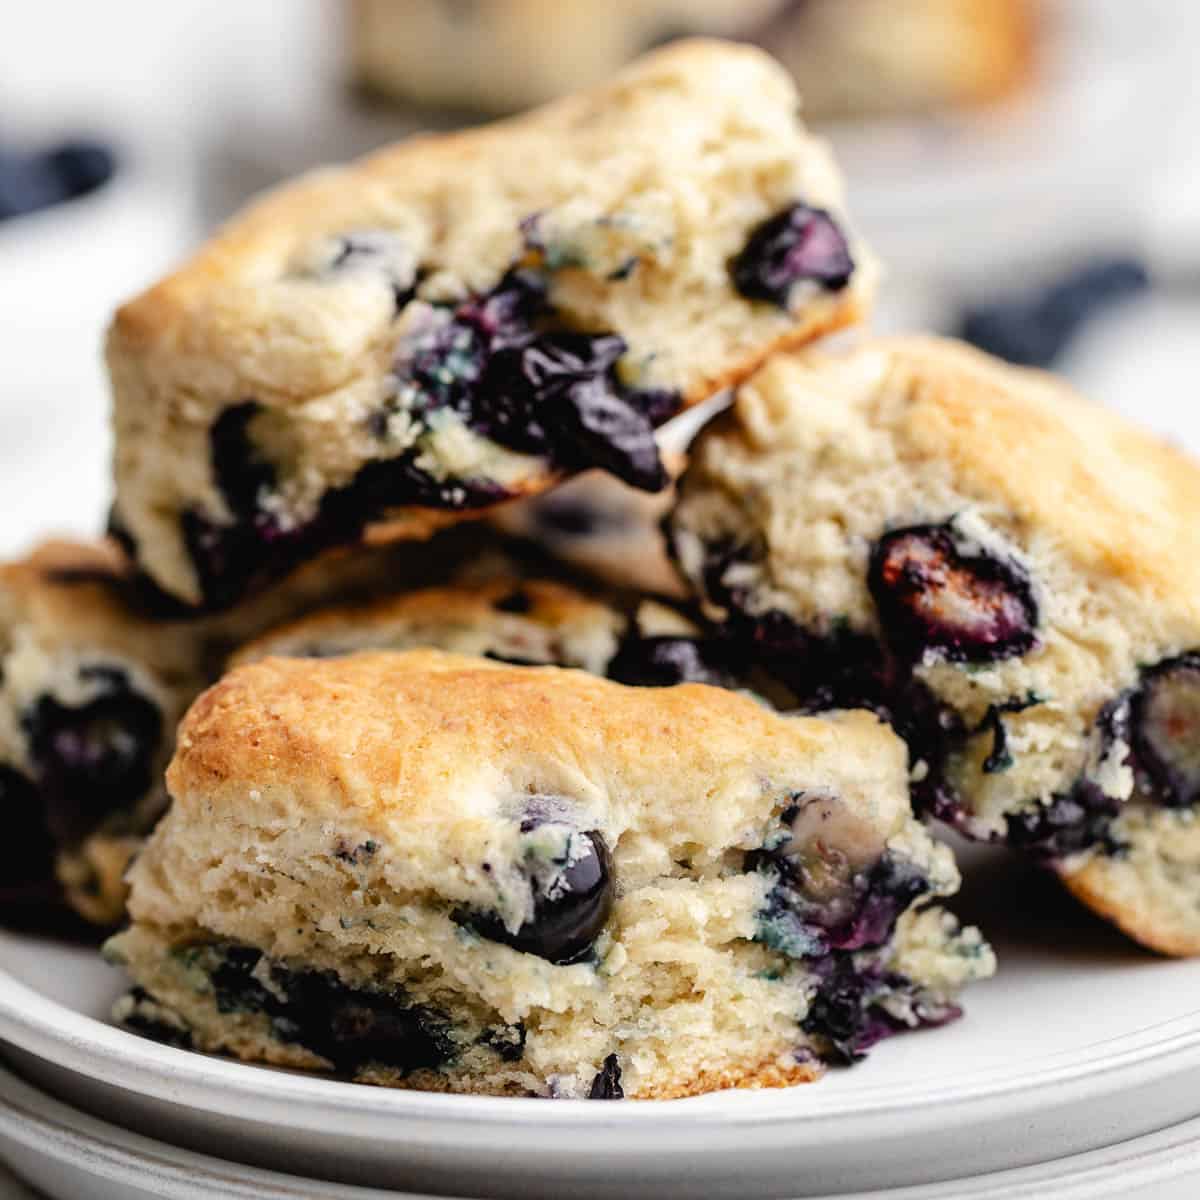 Blueberry biscuits